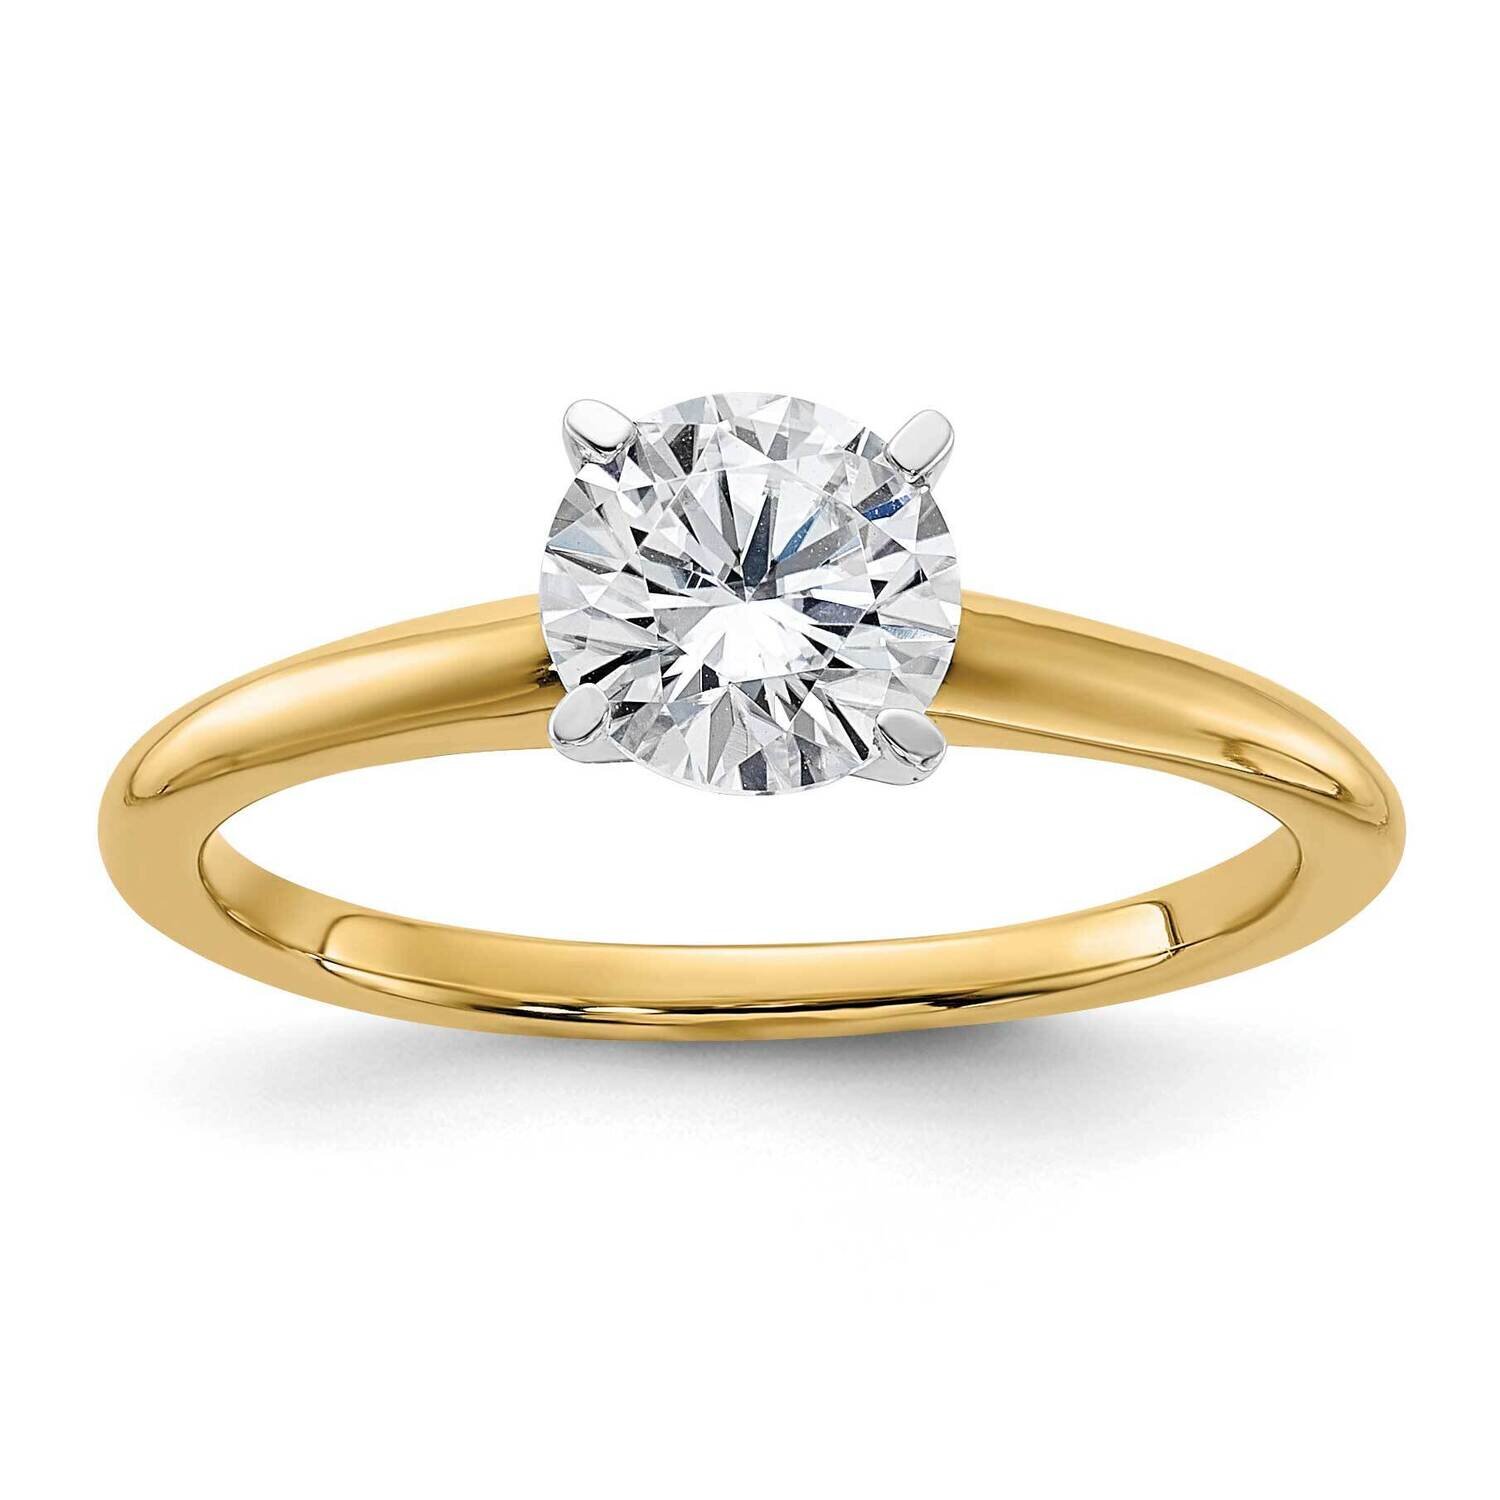 1ct. G H I True Light Round Moissanite Solitaire Ring 14k Two Tone Gold RM5965R-100-10MT